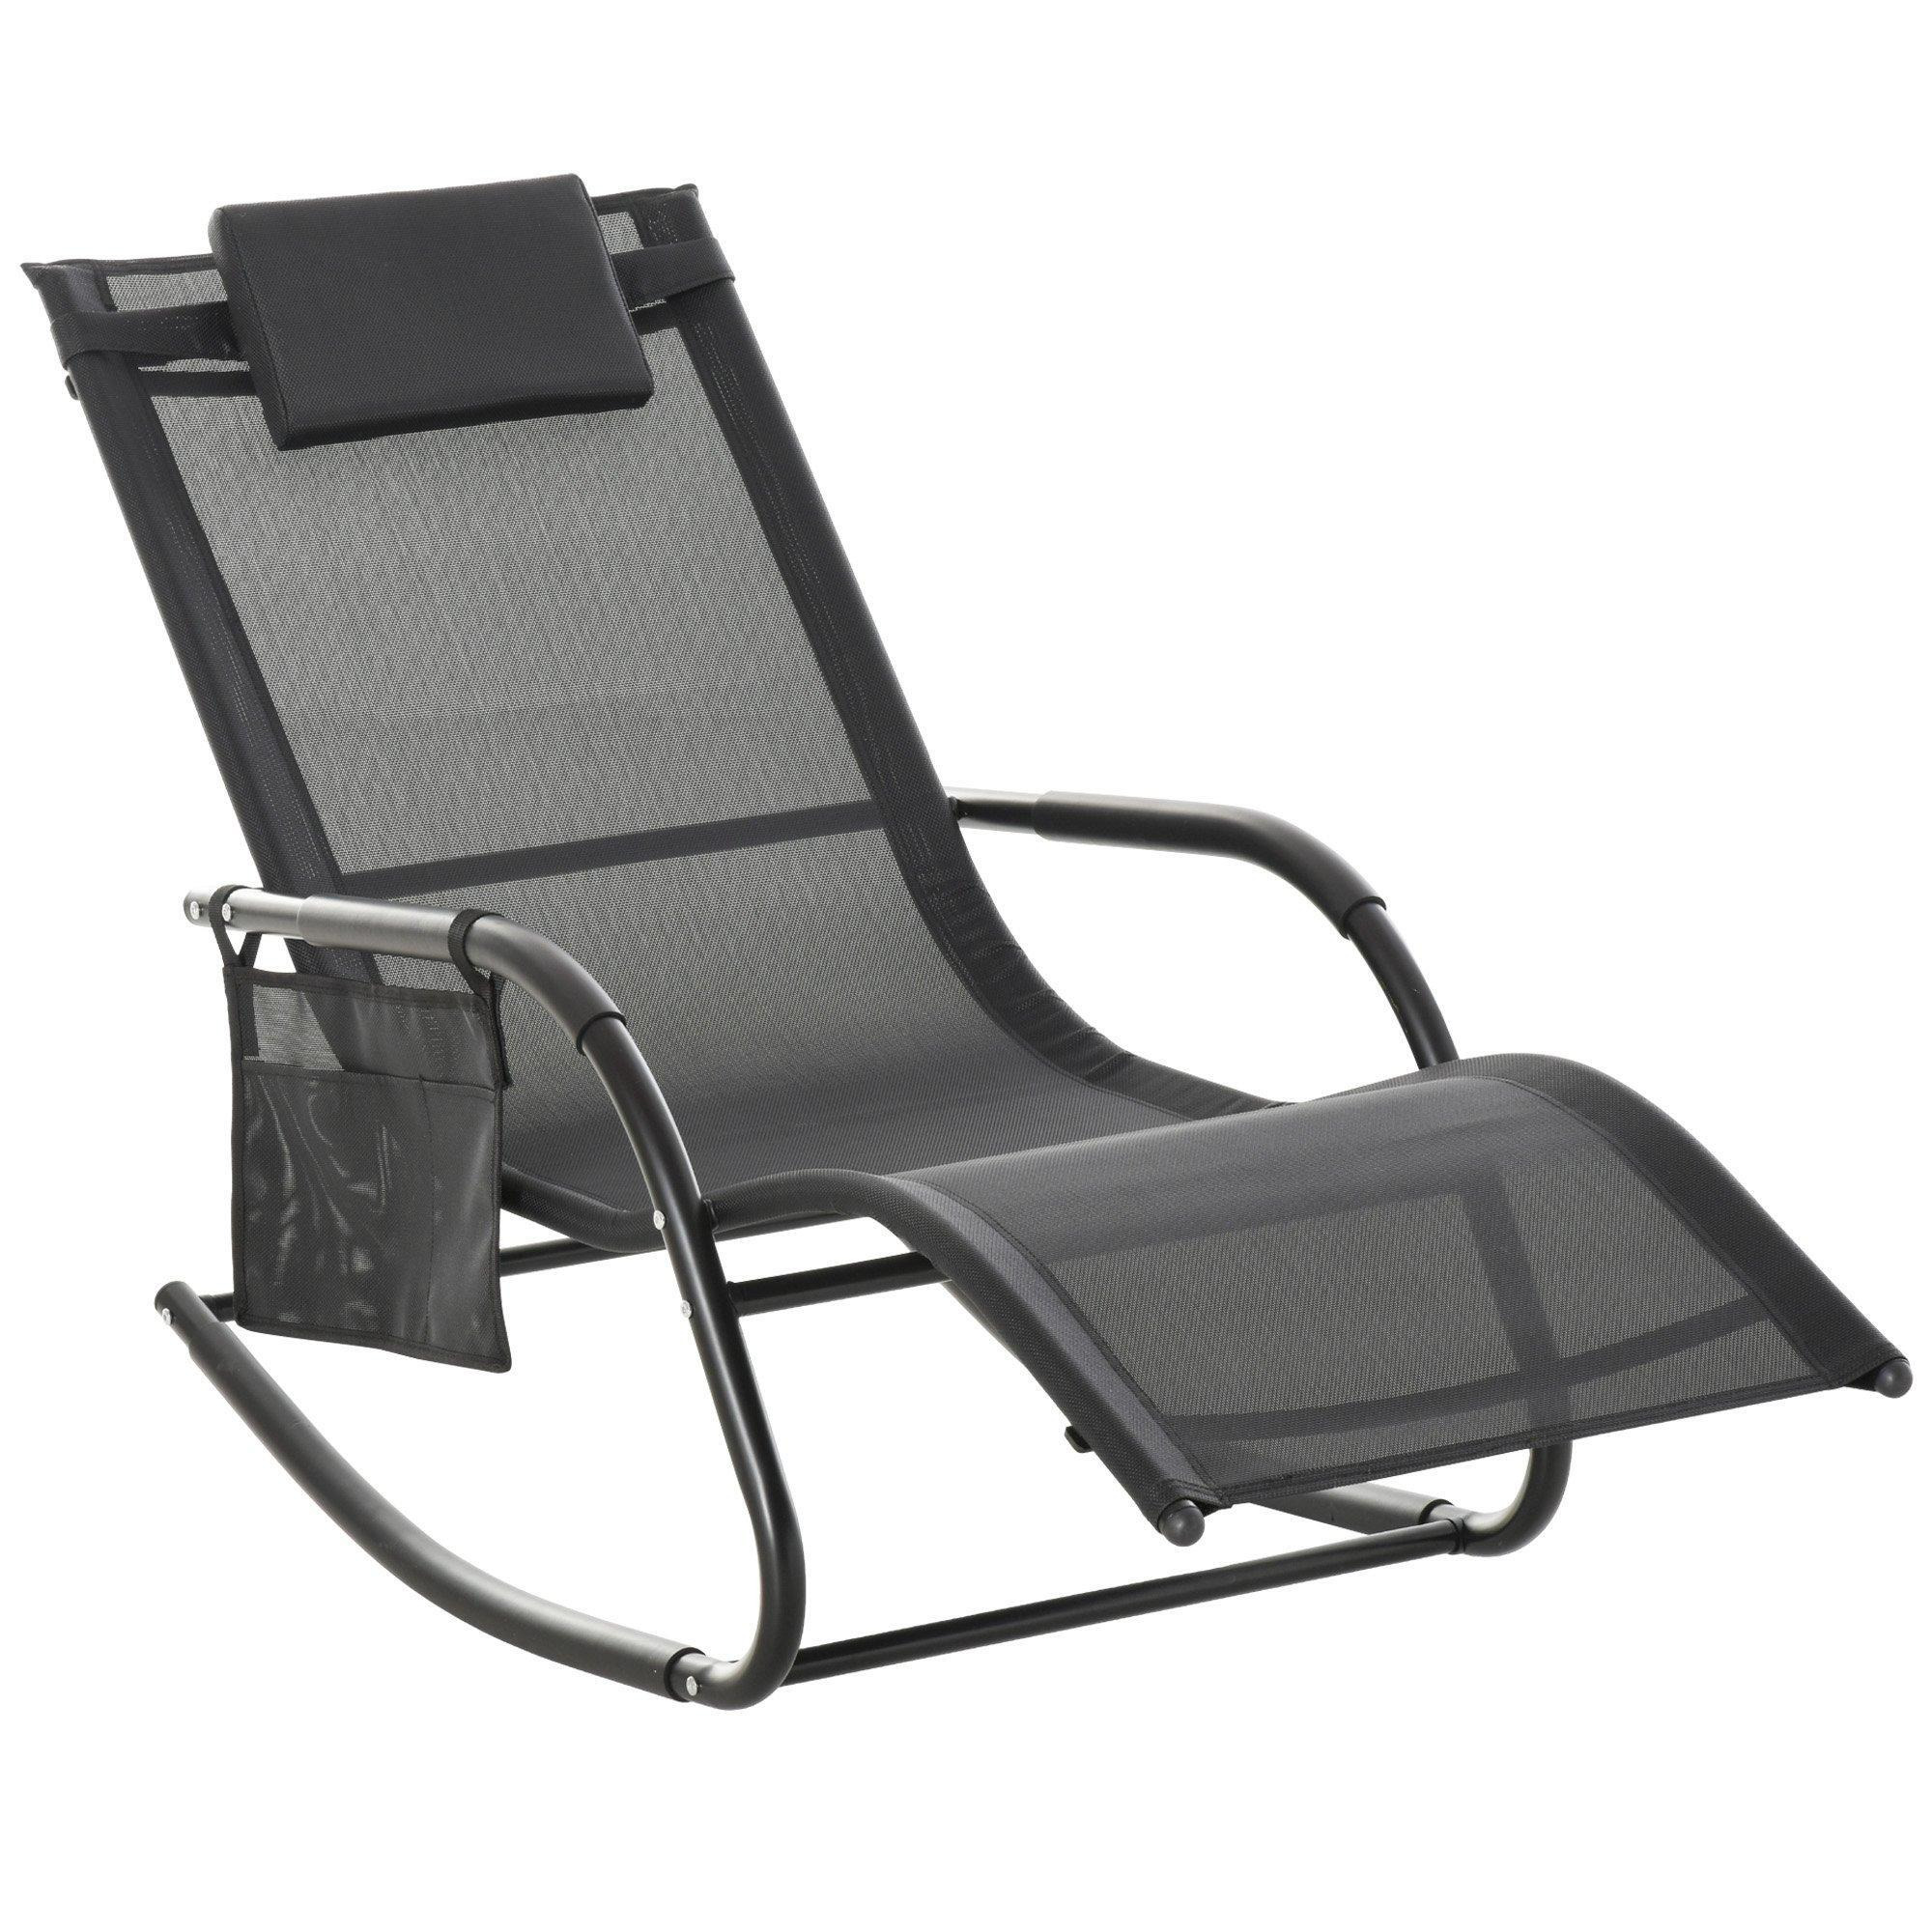 Breathable Mesh Rocking Chair Outdoor Recliner with Headrest - image 1